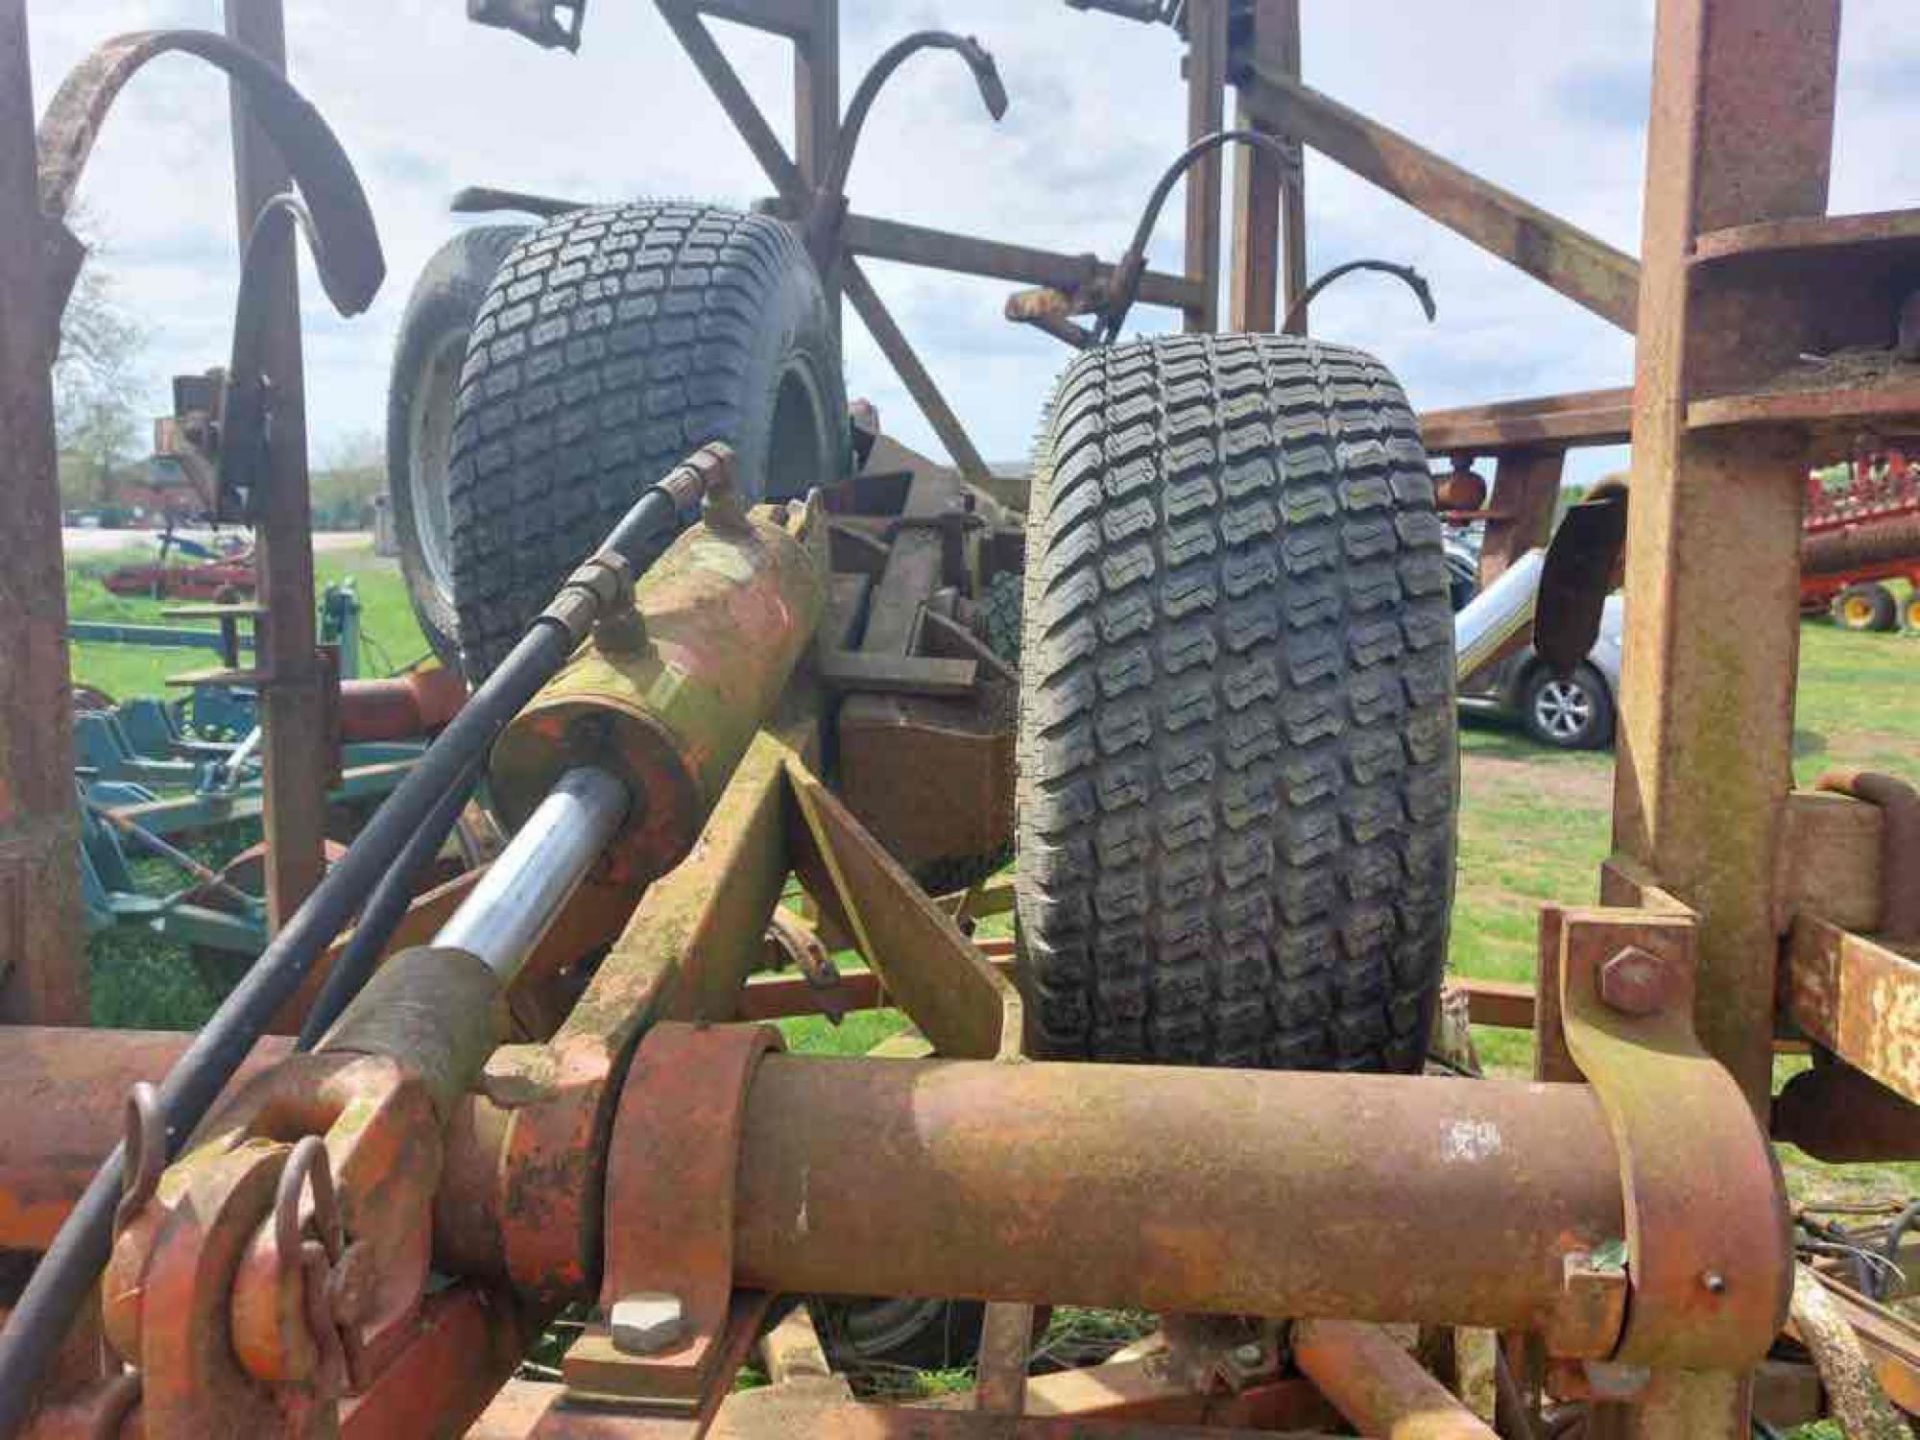 1986 Wilrich 9m trailed cultivator, hydraulic folding. Sold in situ from Milton House Farm, Milton E - Image 11 of 11